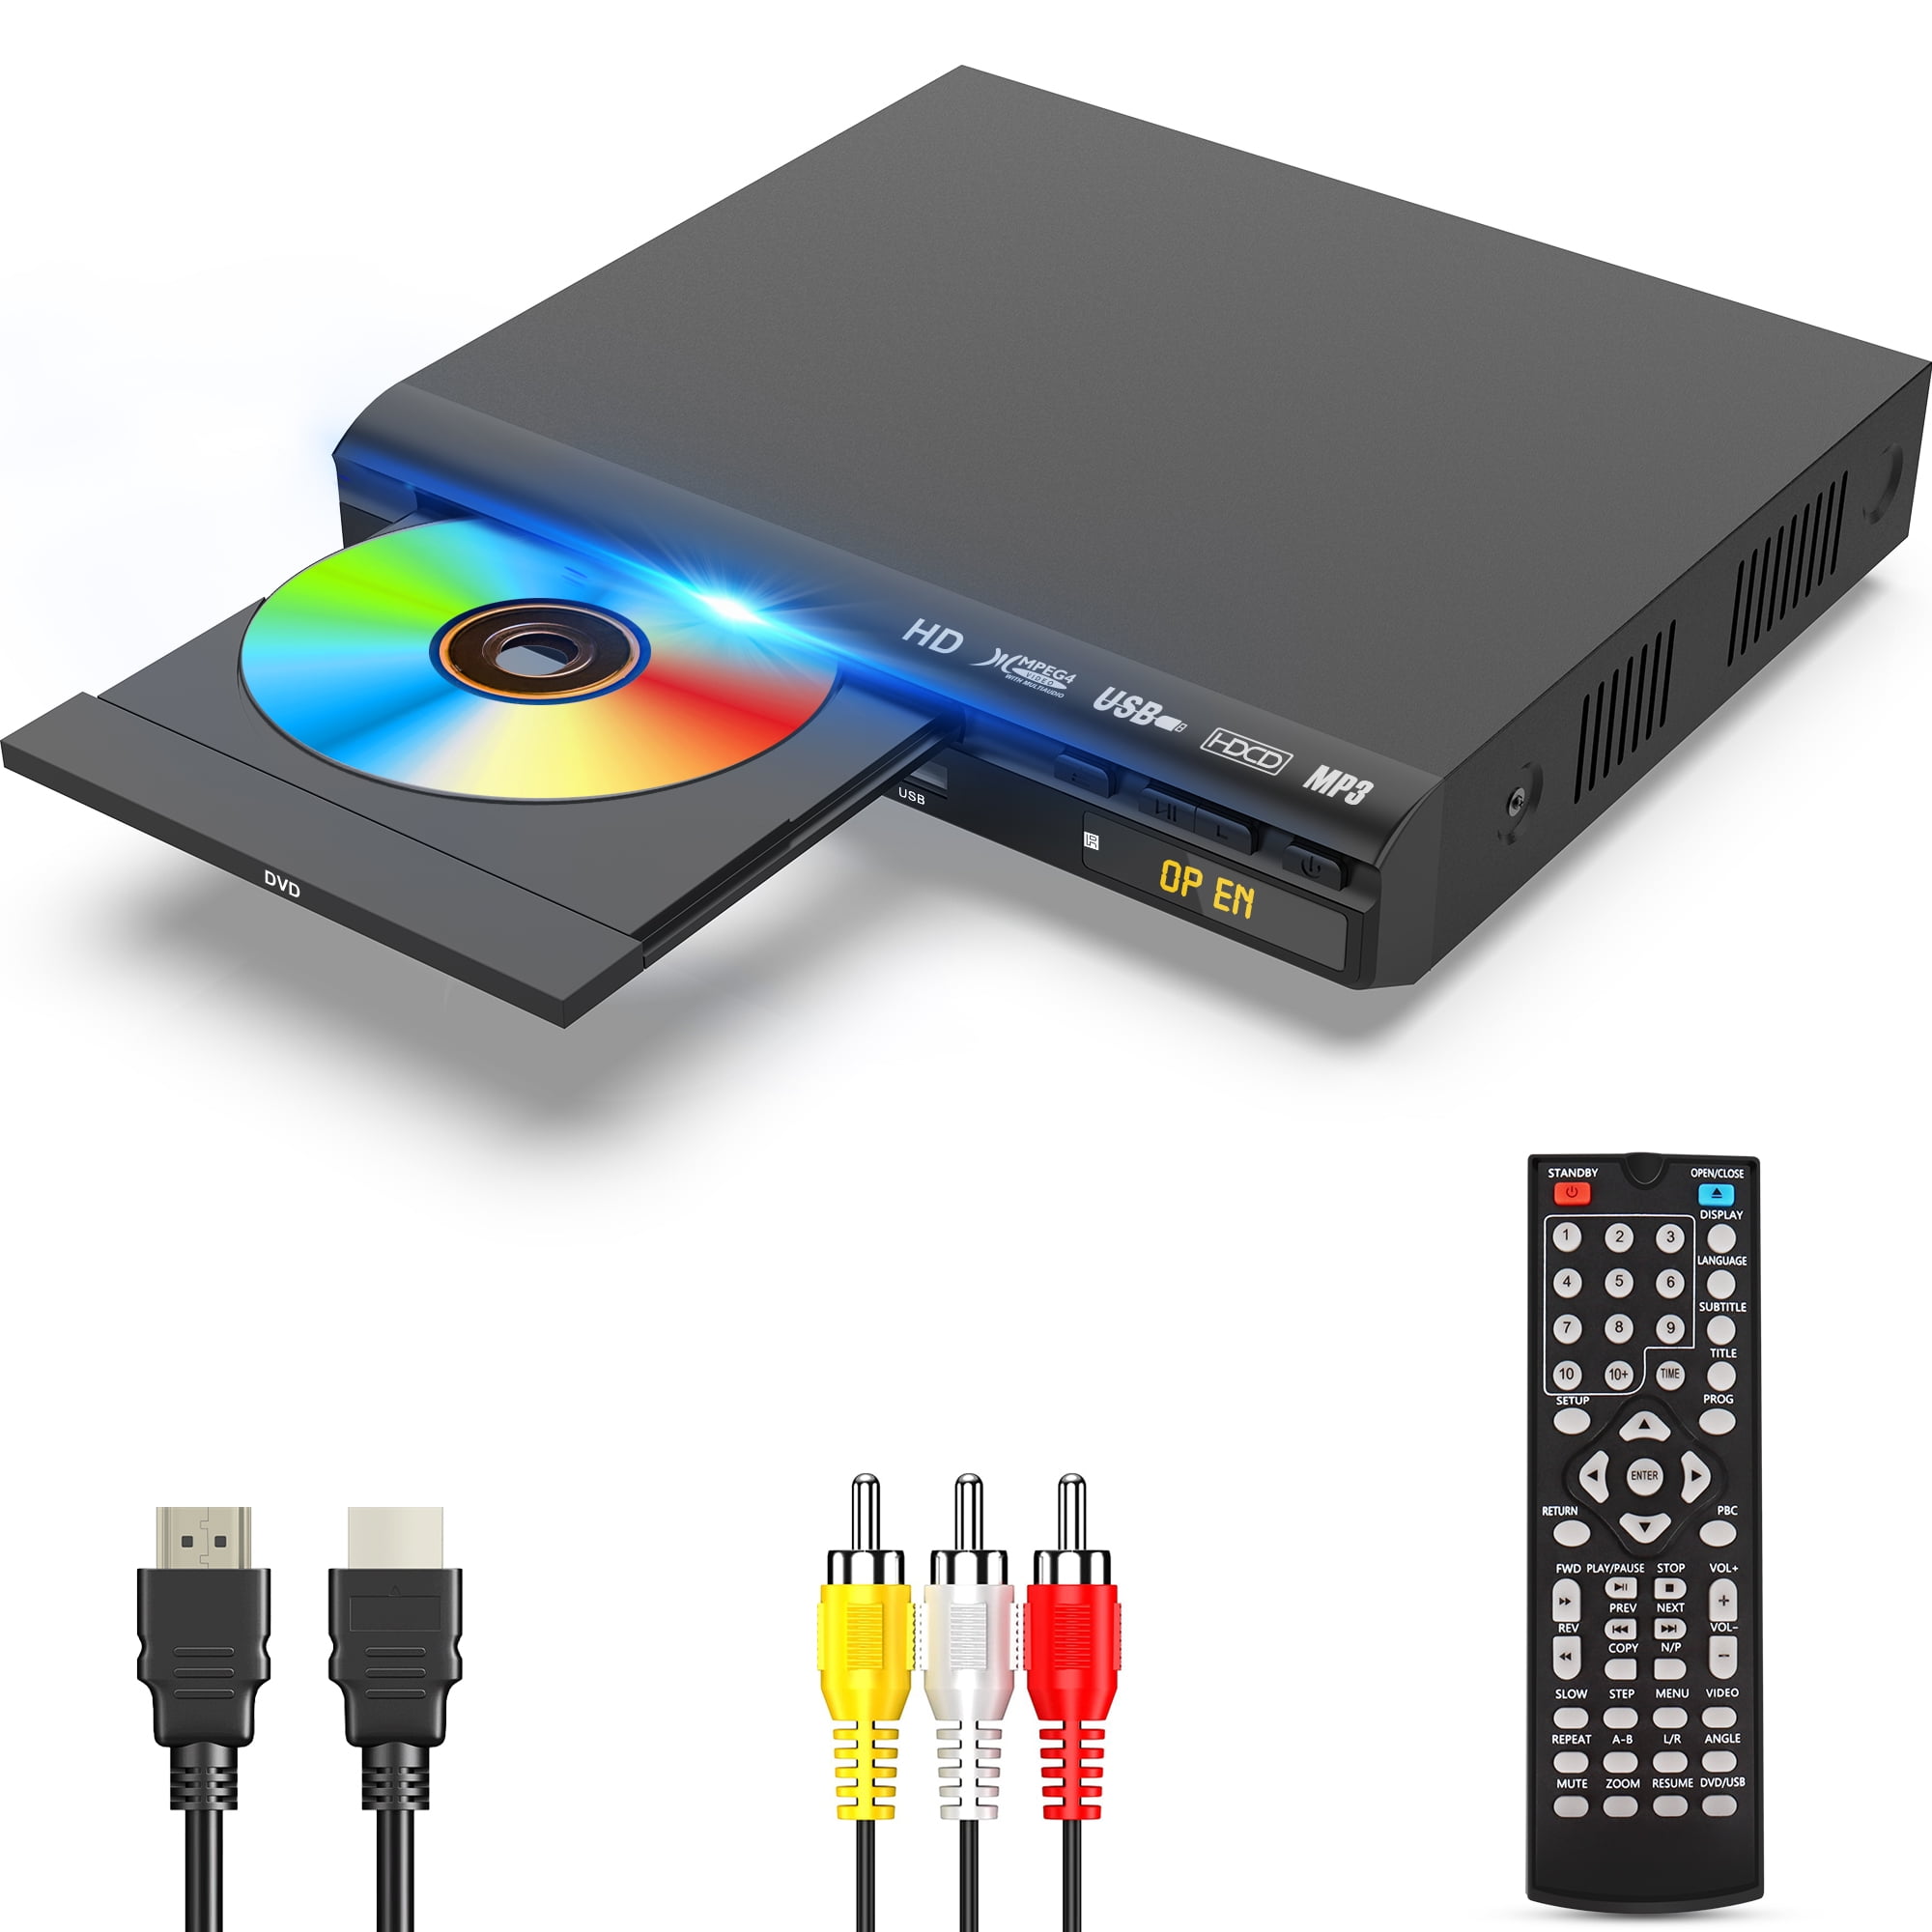 WONNIE HD DVD Player for TV, CD Players for Home with HD/AV/Coaxial Output Input, Built in PAL/NTSC System, HDMI/AV Cable and Full Function Remote Control Included - Walmart.com